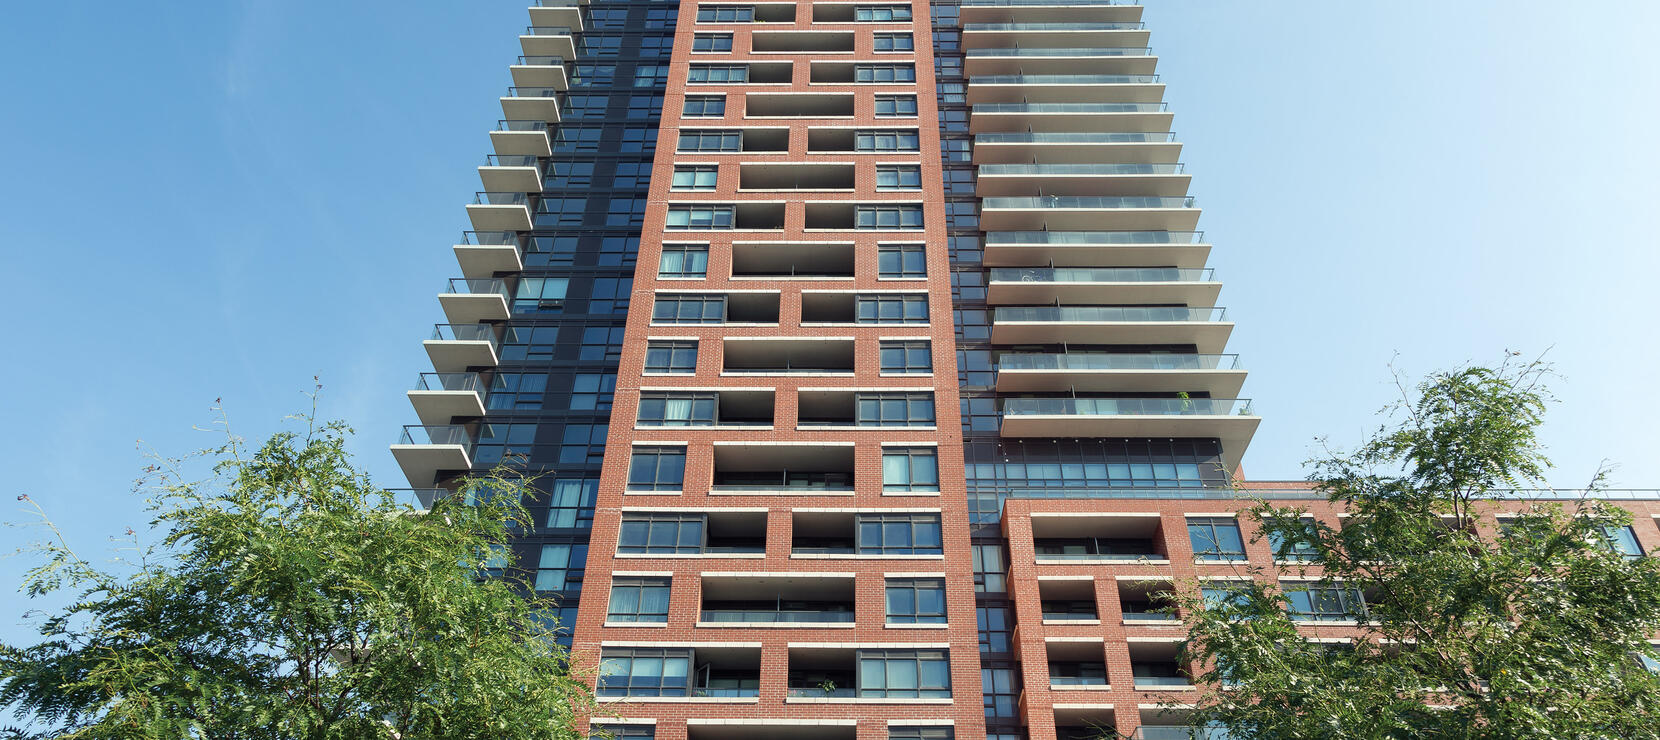 Residential building using Architectural Series and Finesse products from Brampton Brick